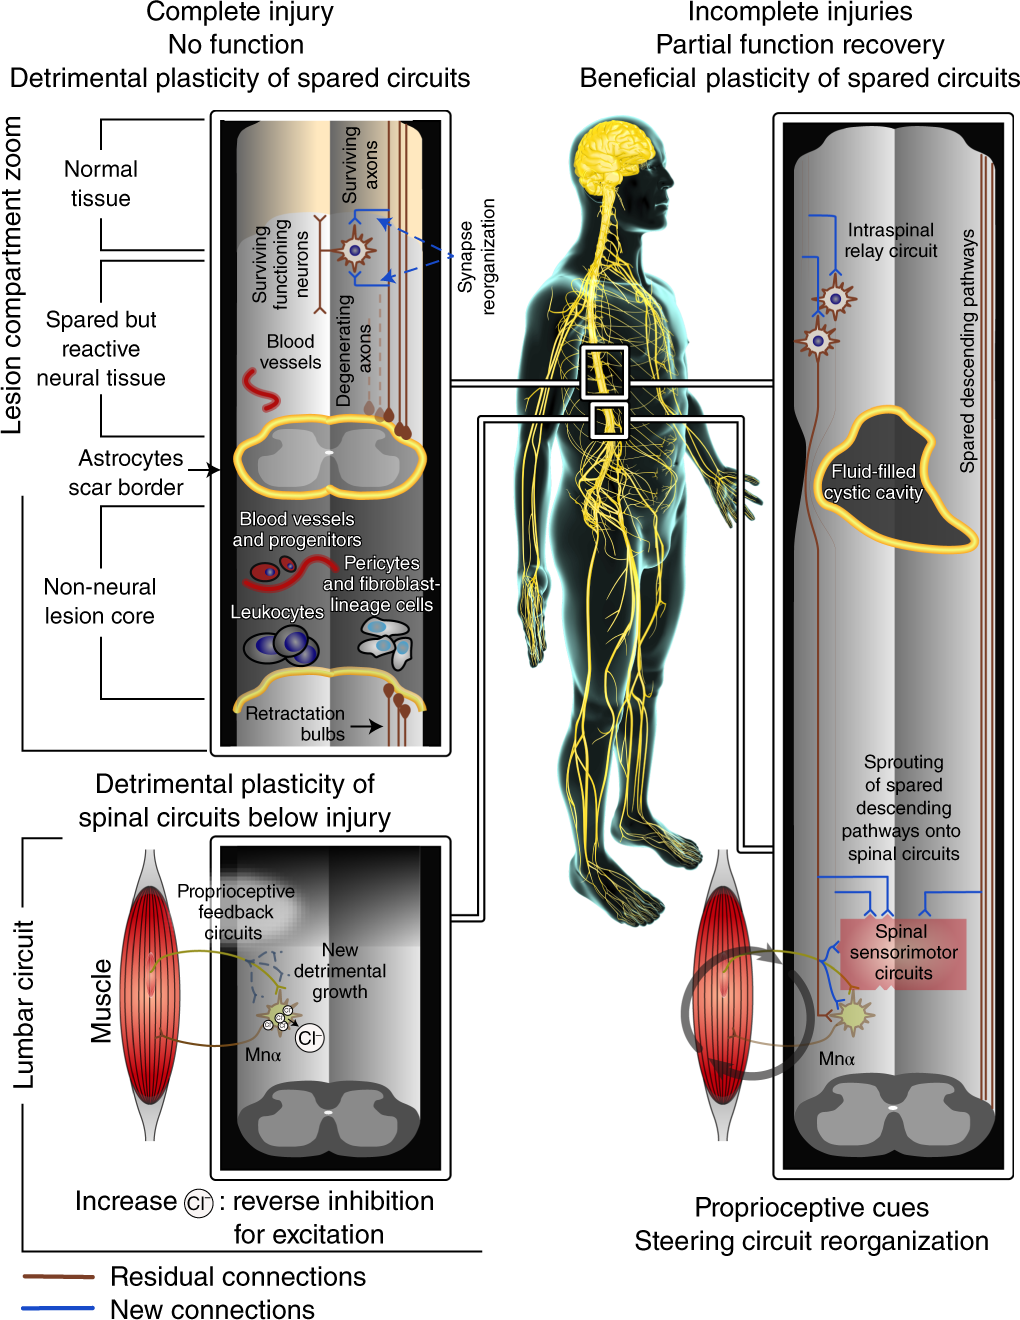 Spinal cord repair: advances in biology and technology | Nature Medicine